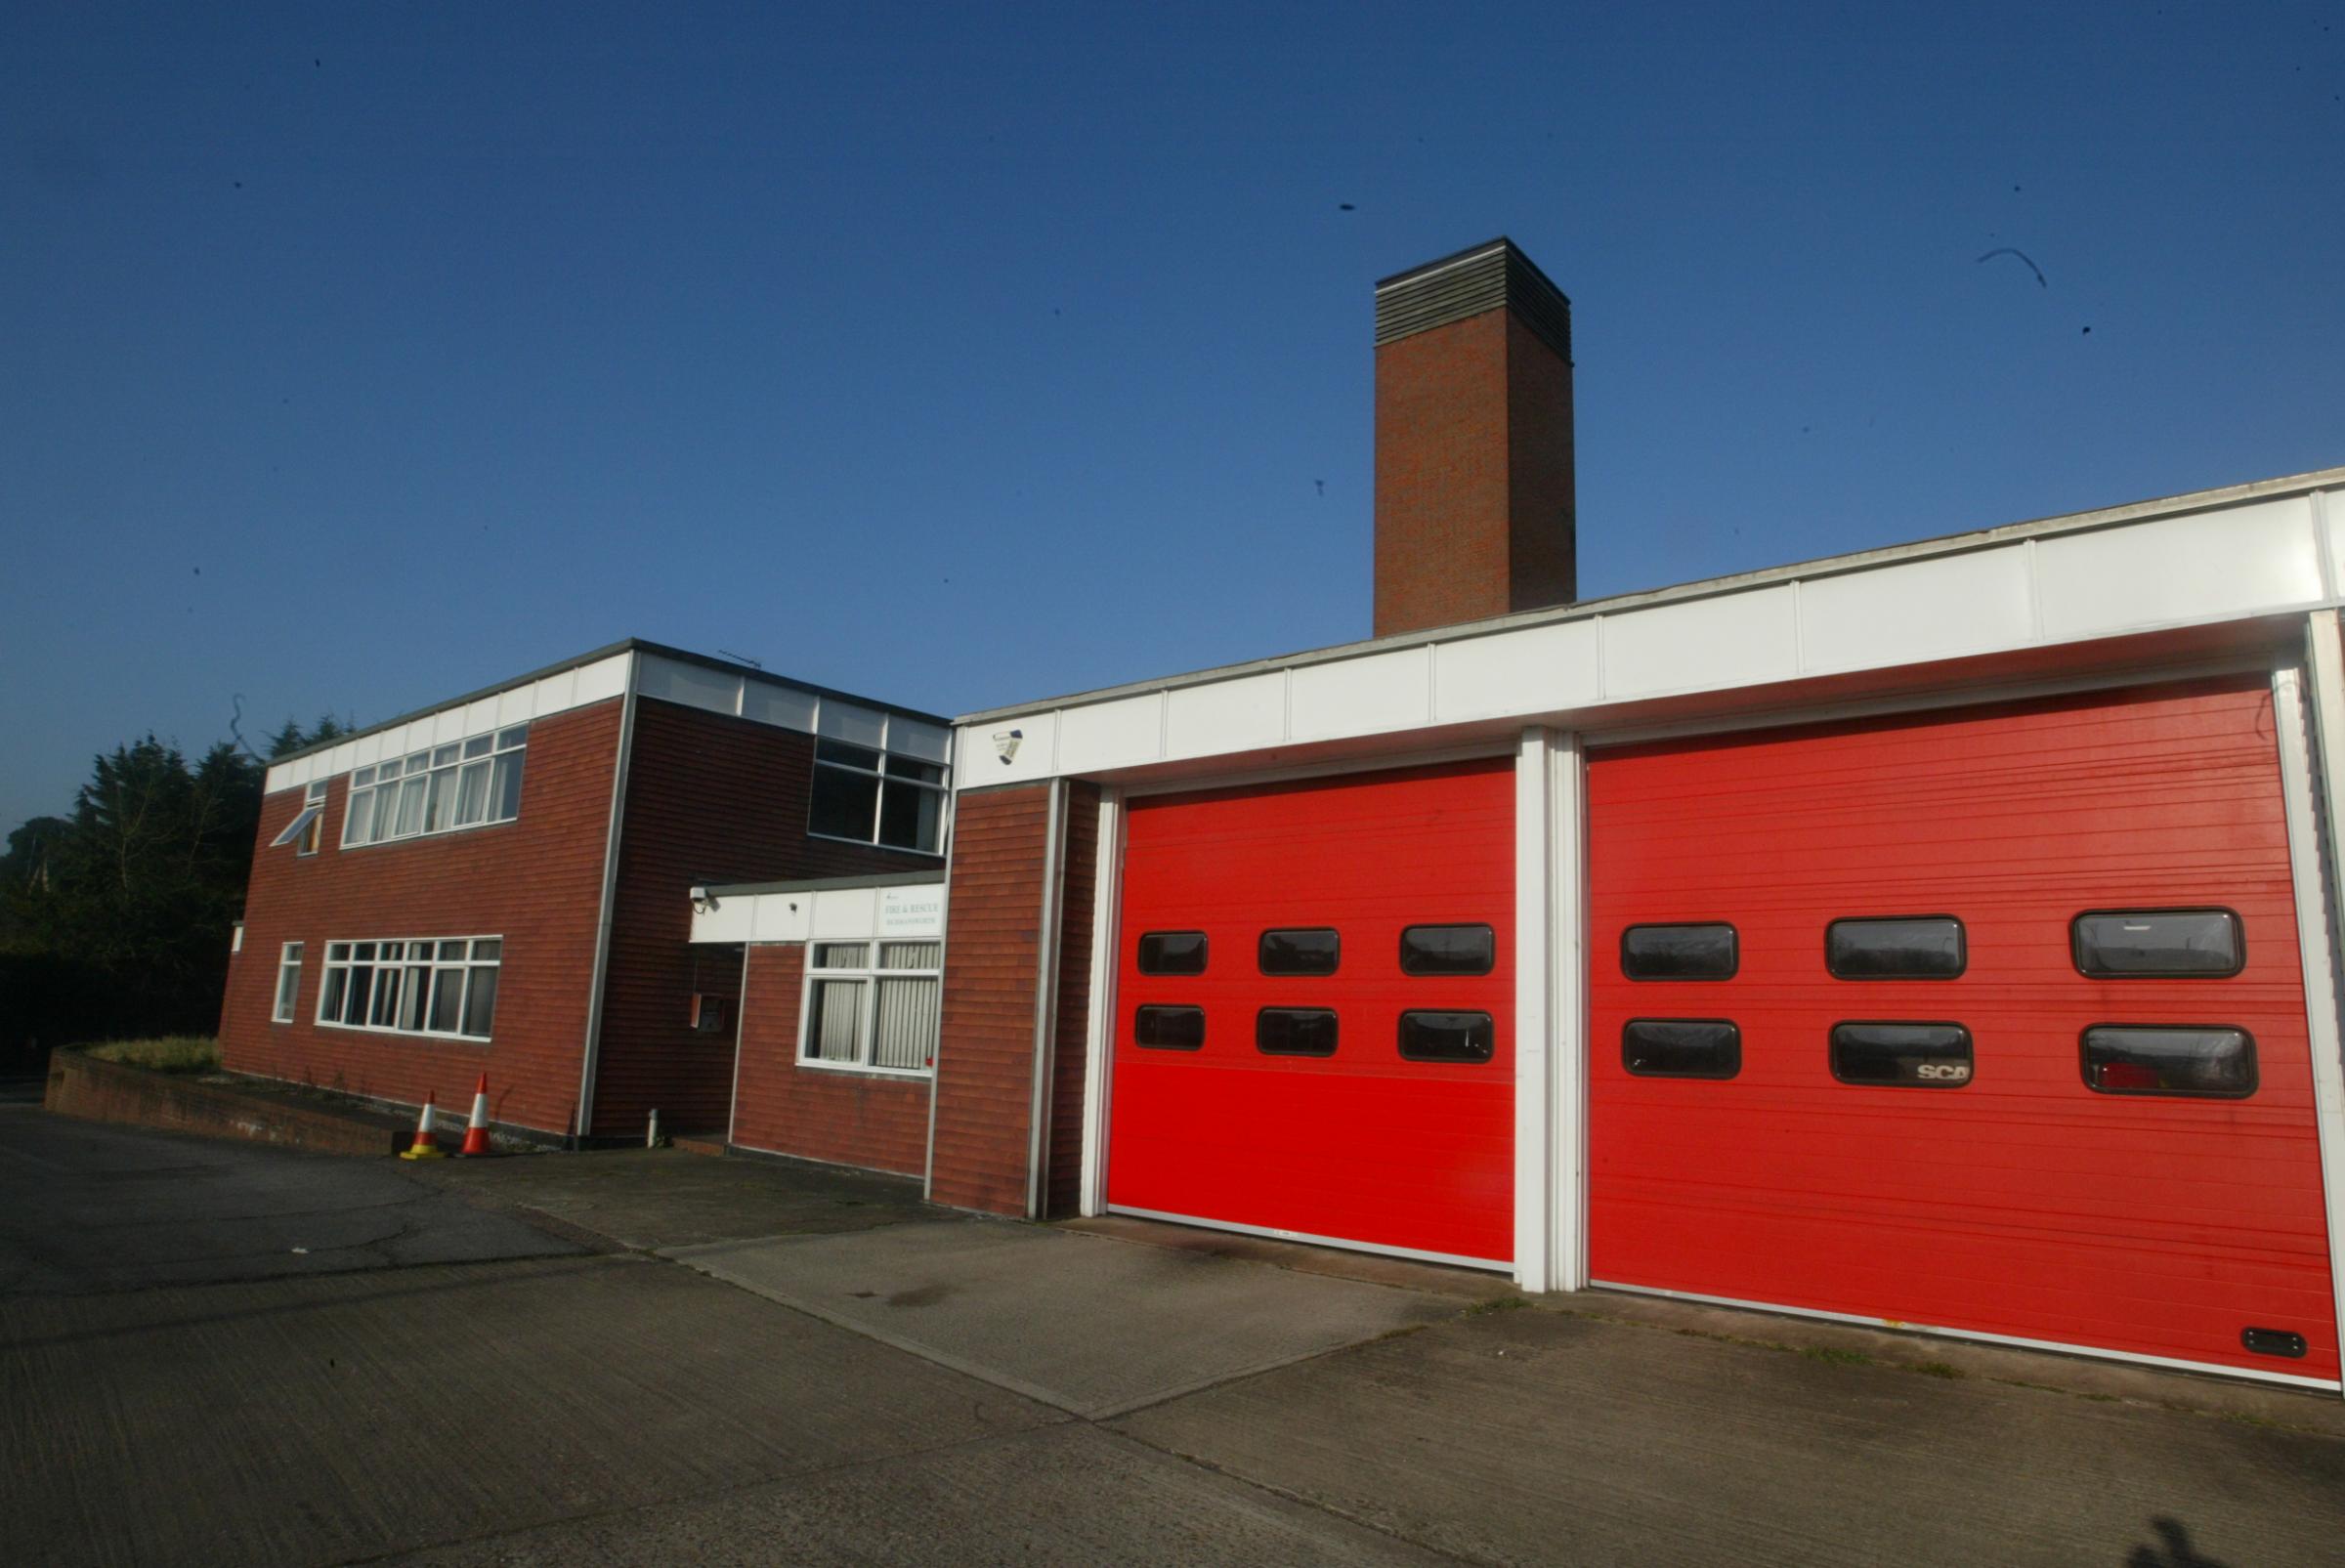 Plan for Fire Service 'not fit for purpose'